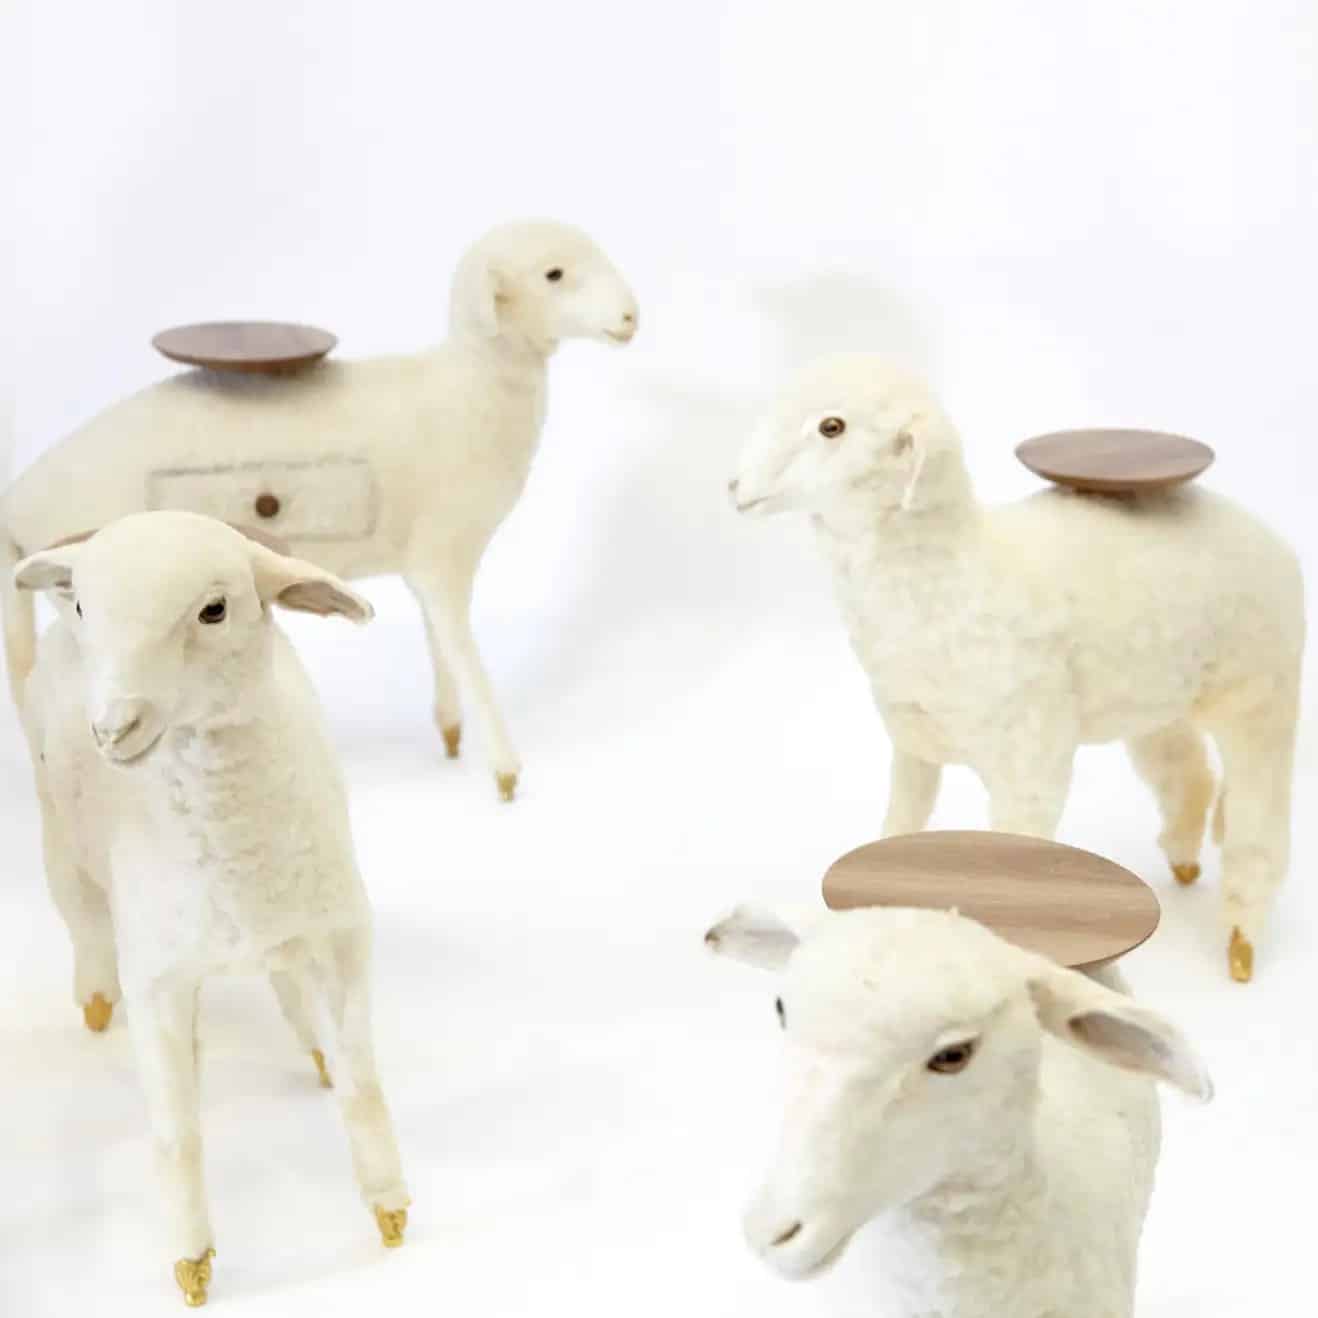 featured image for post: These Surreal and Sustainable Lamb Tables Are Based on a 1942 Dalí Painting